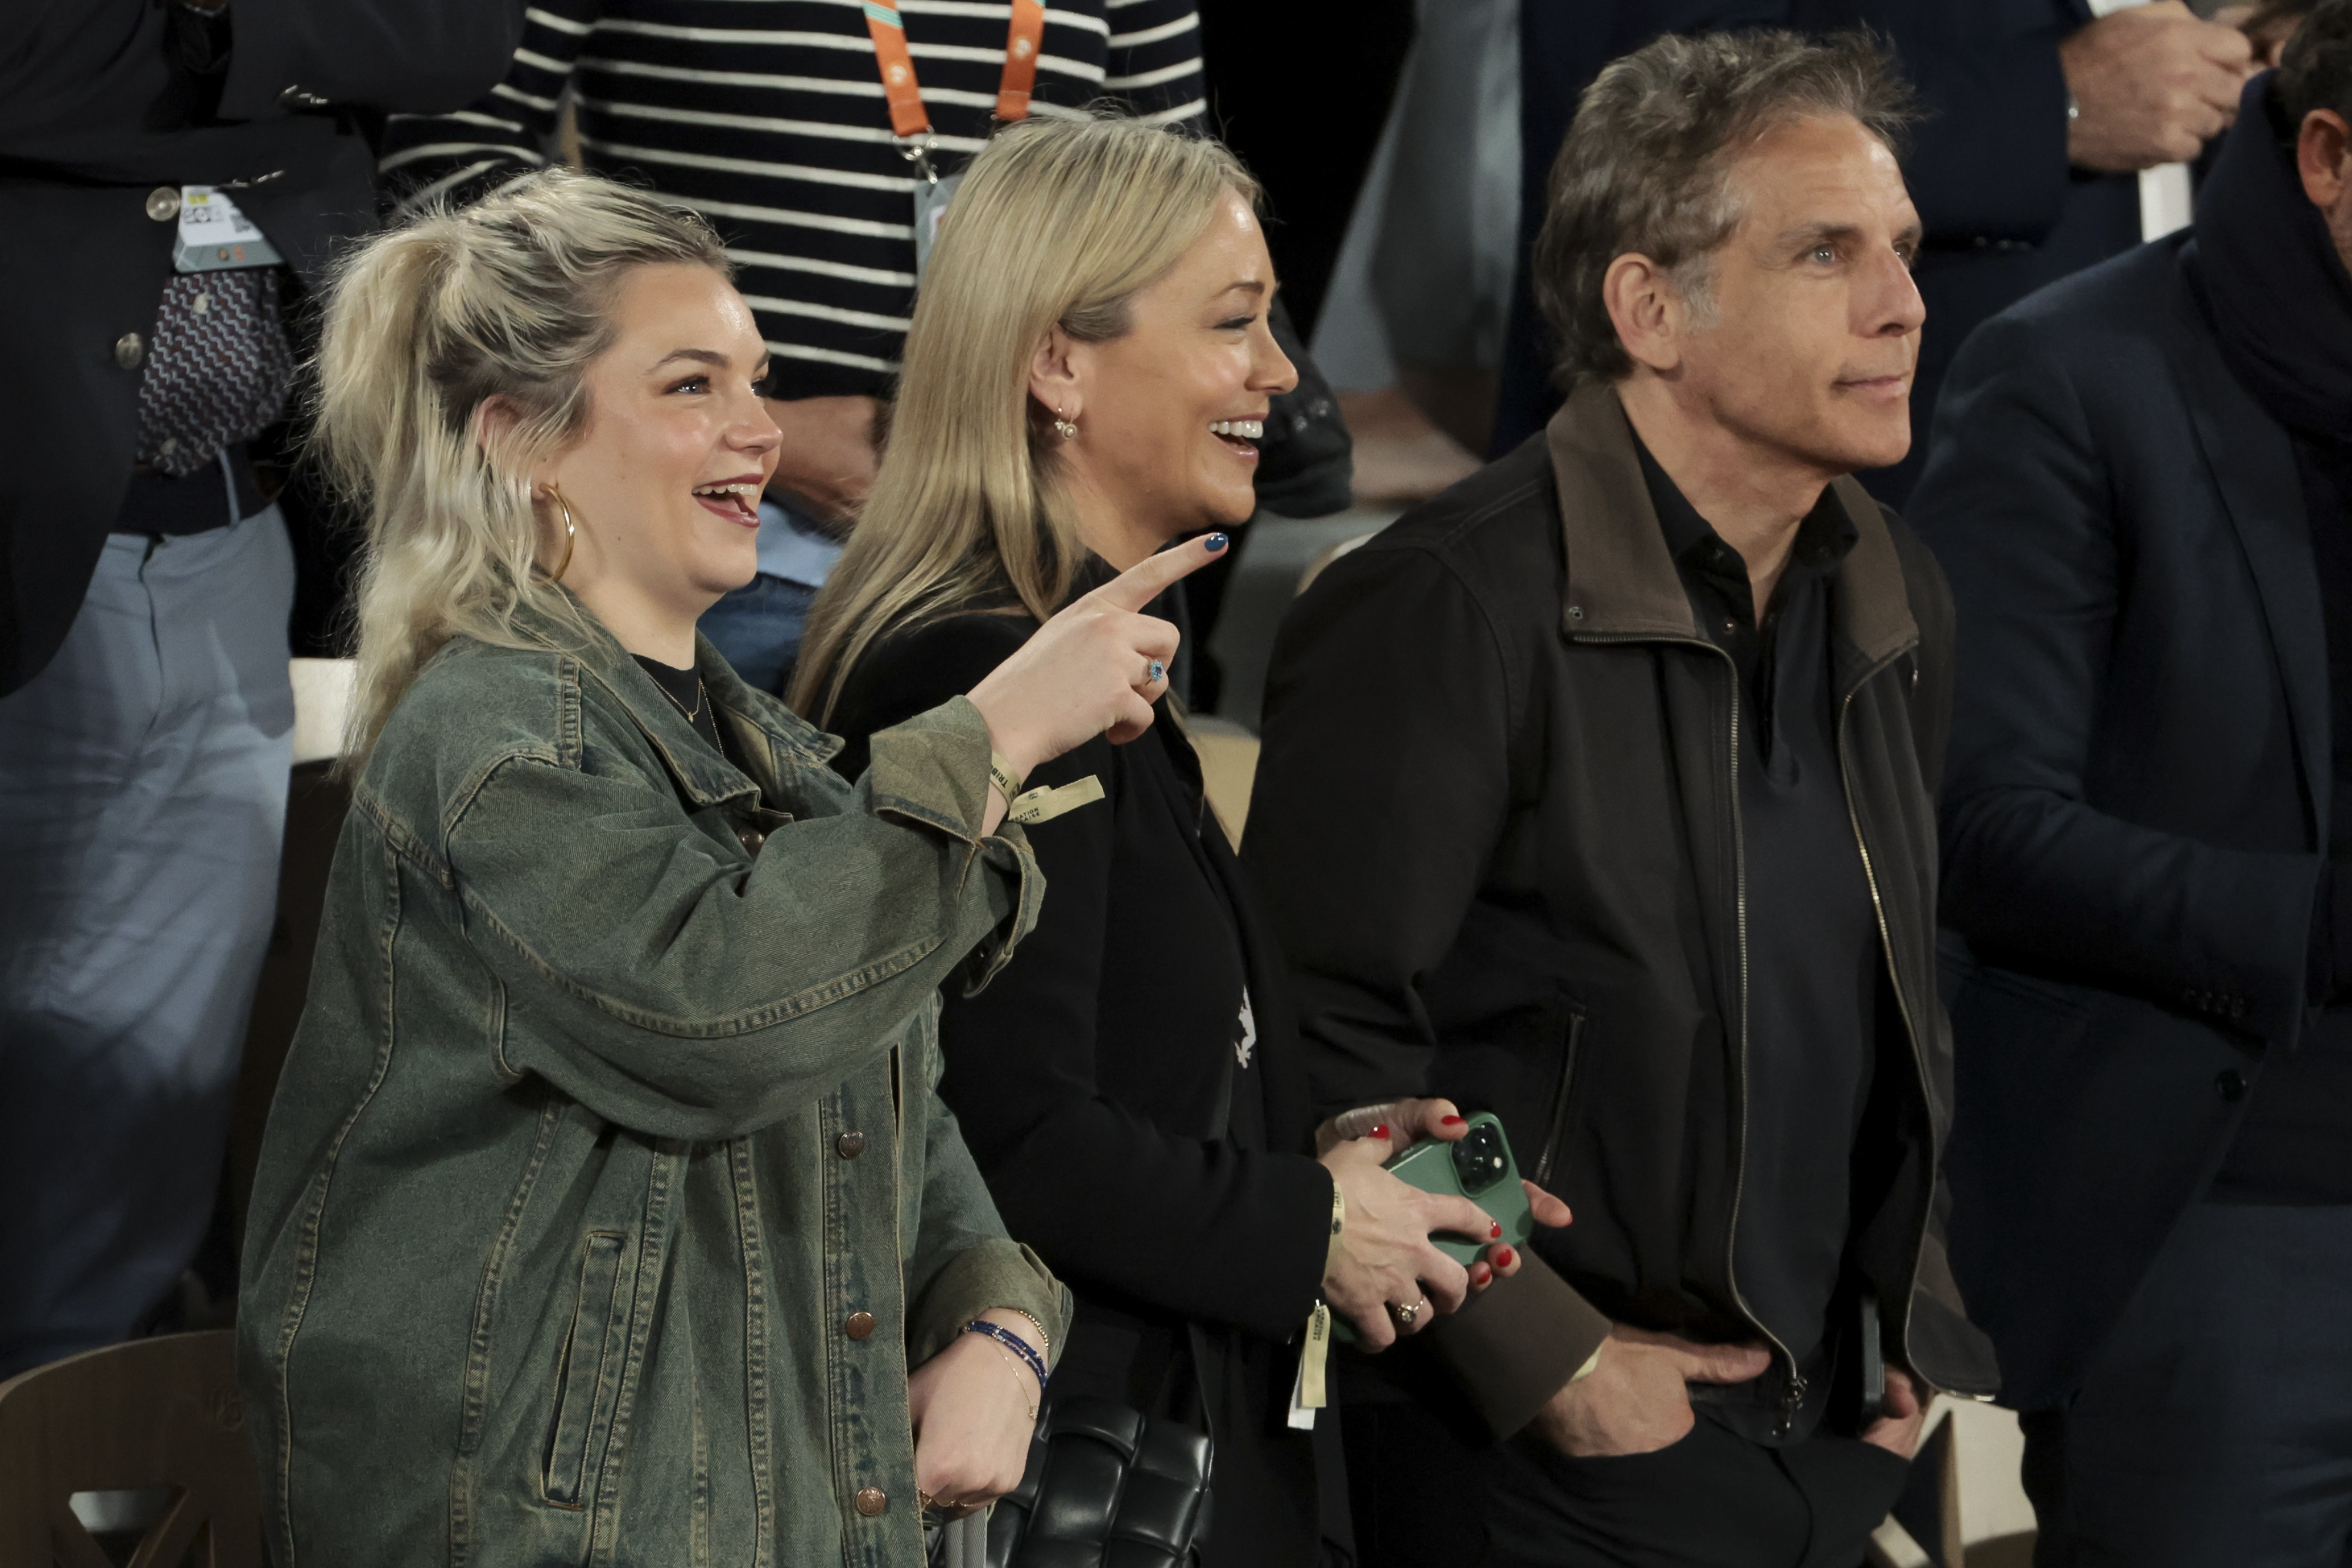 Ella Stiller and her parents Christine Taylor and Ben Stiller at the quarter-final match at the French Open Grand Slam tennis tournament on June 4, 2024, in Paris, France | Source: Getty Images